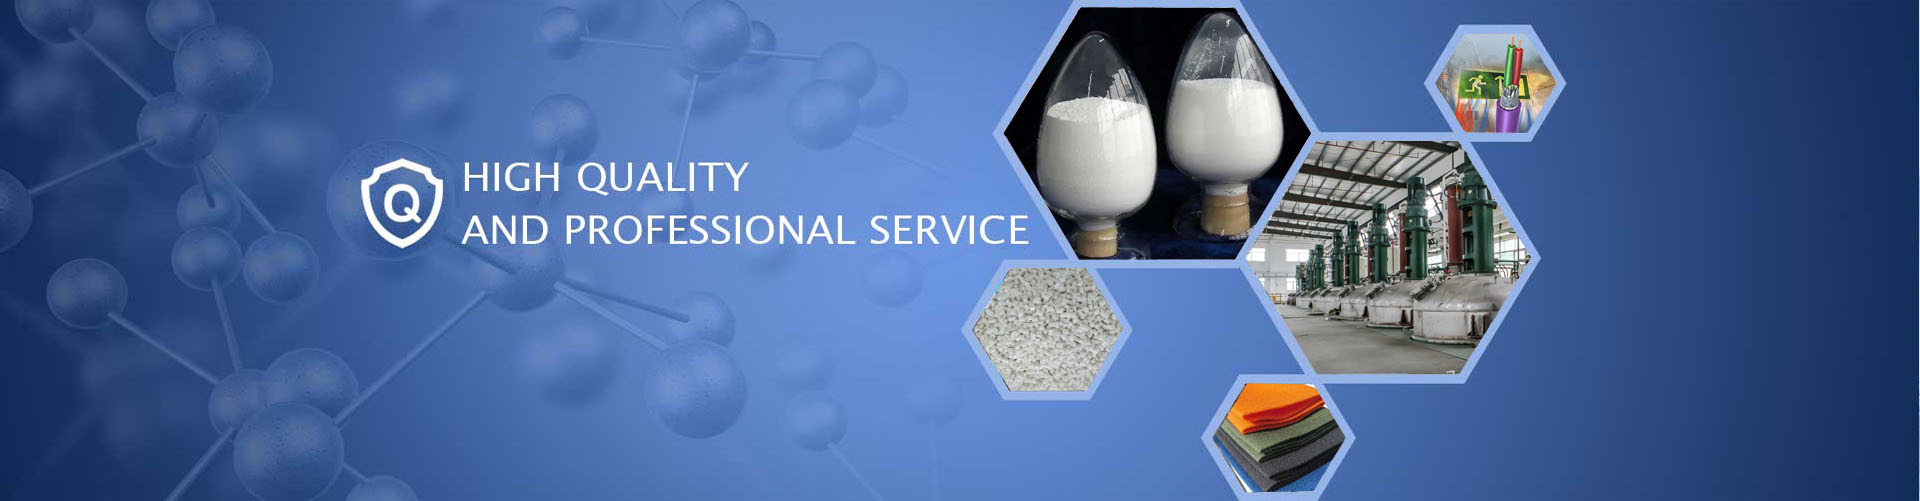 Decabromodiphenyl Ethane, Brominated Polystyrene, Brominated Epoxy Resin, BDDP, FR-245, BT93W